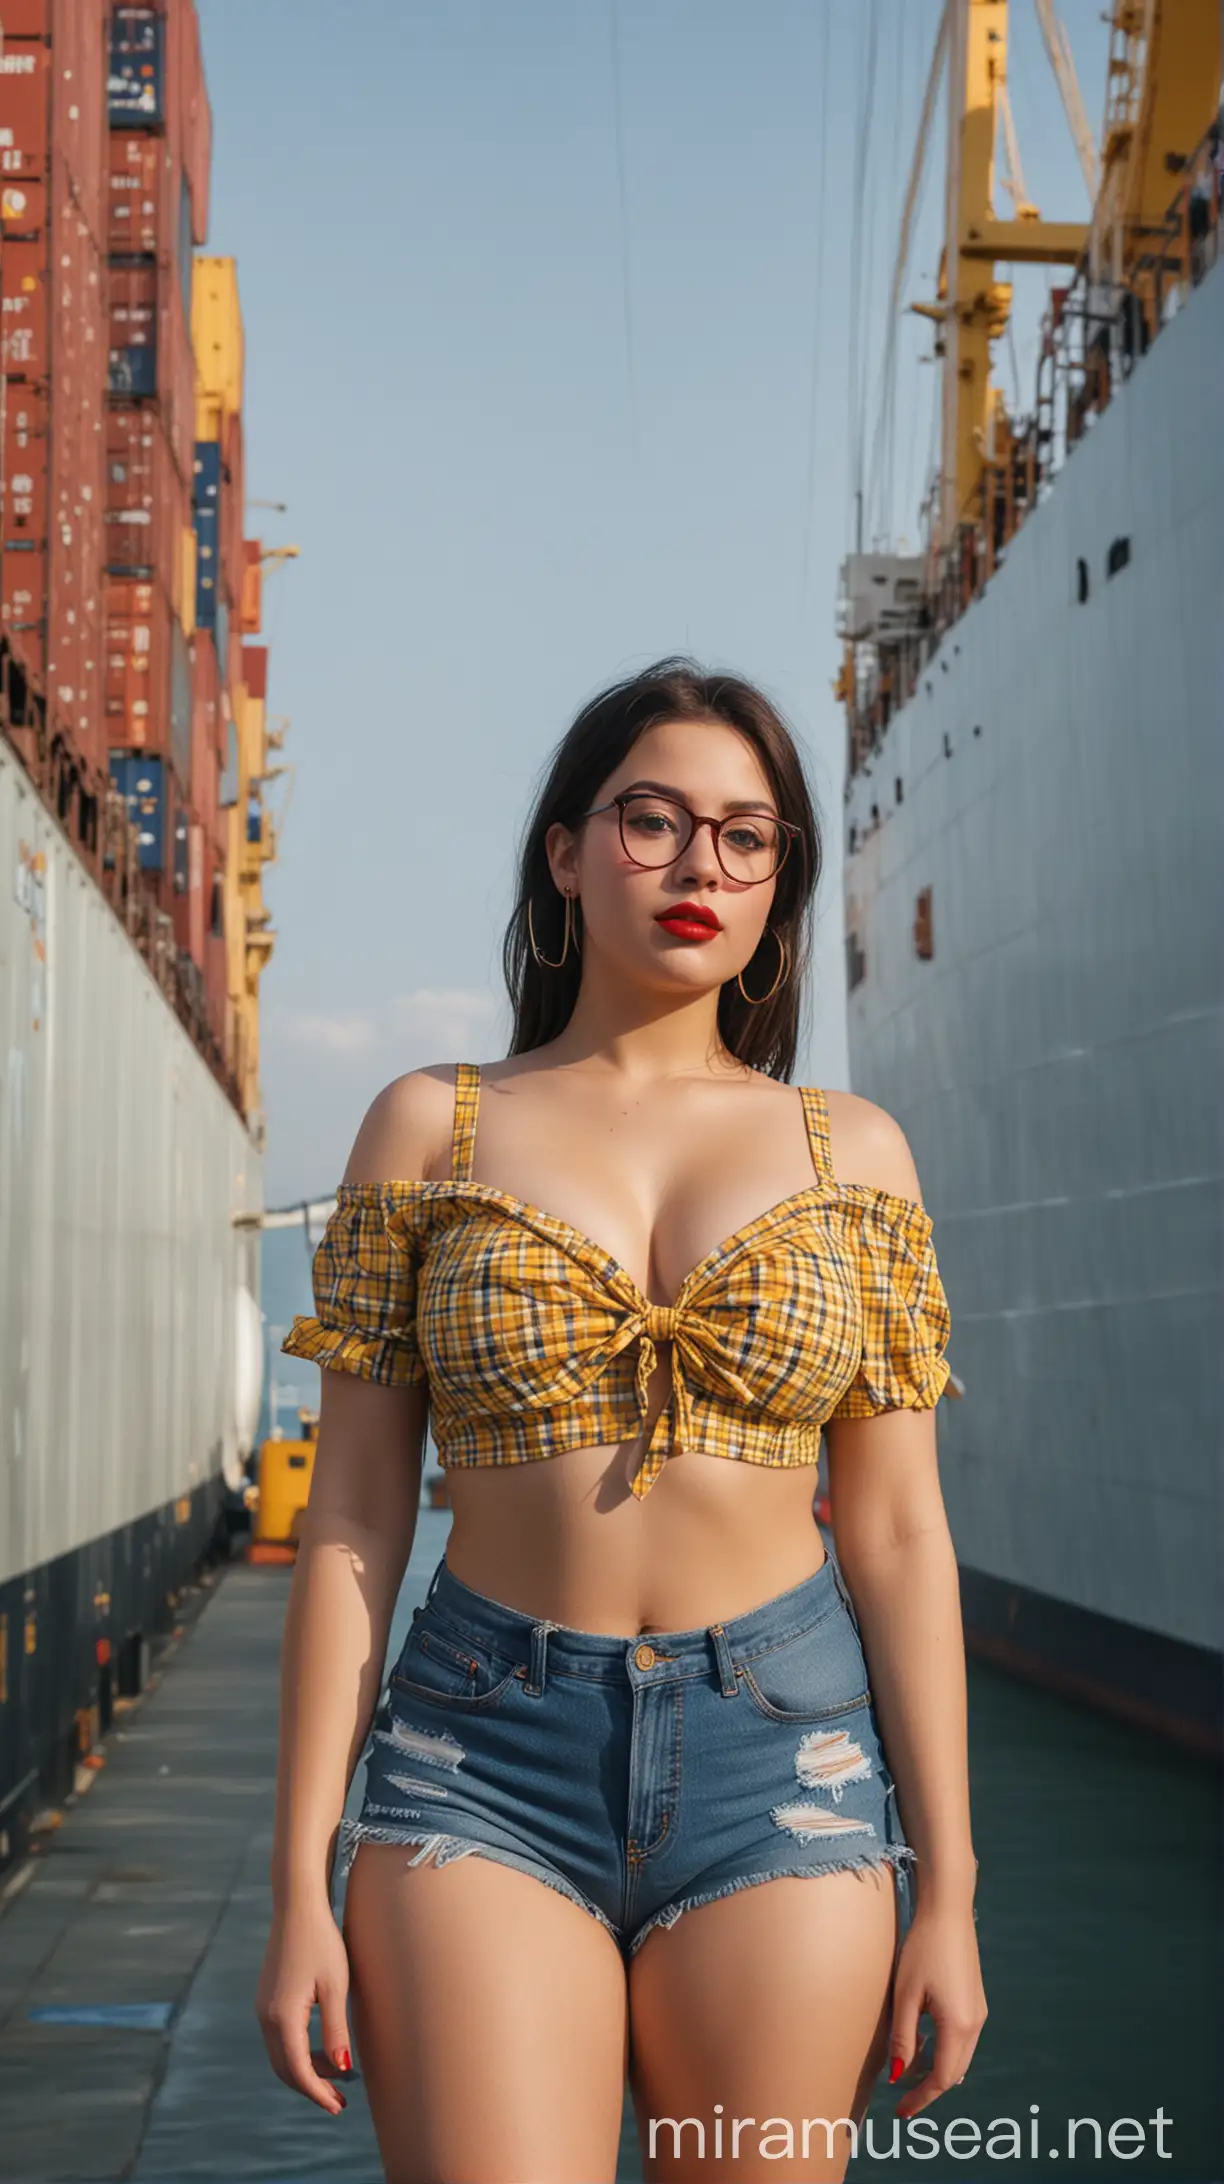 Beautiful American Curvy Girl in Yellow Check Shirt and Glasses by Big Container Ship